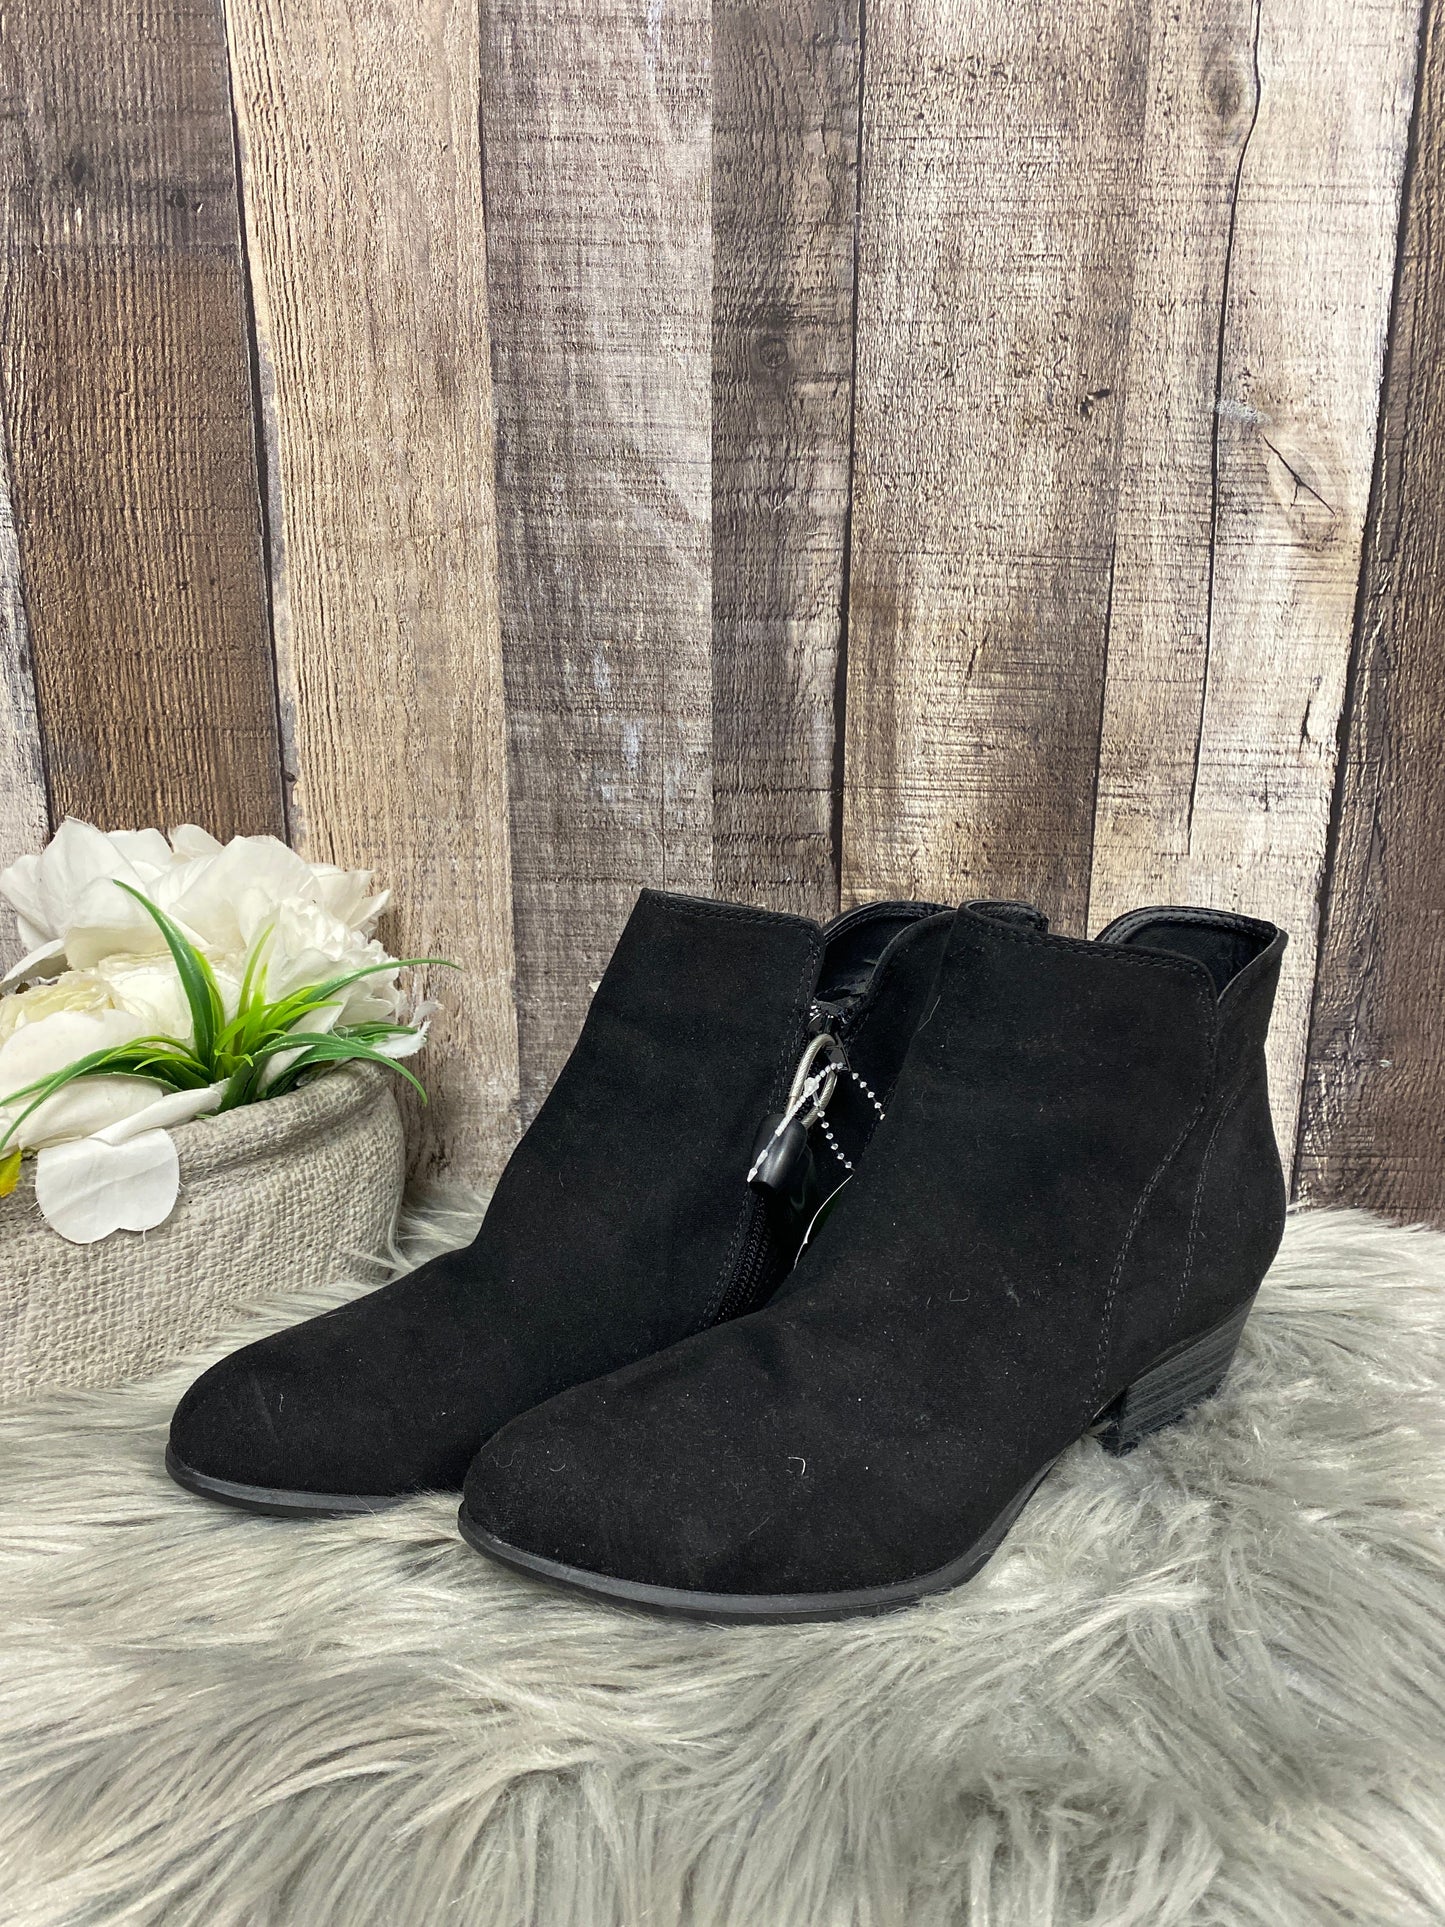 Boots Ankle Heels By Union Bay  Size: 6.5